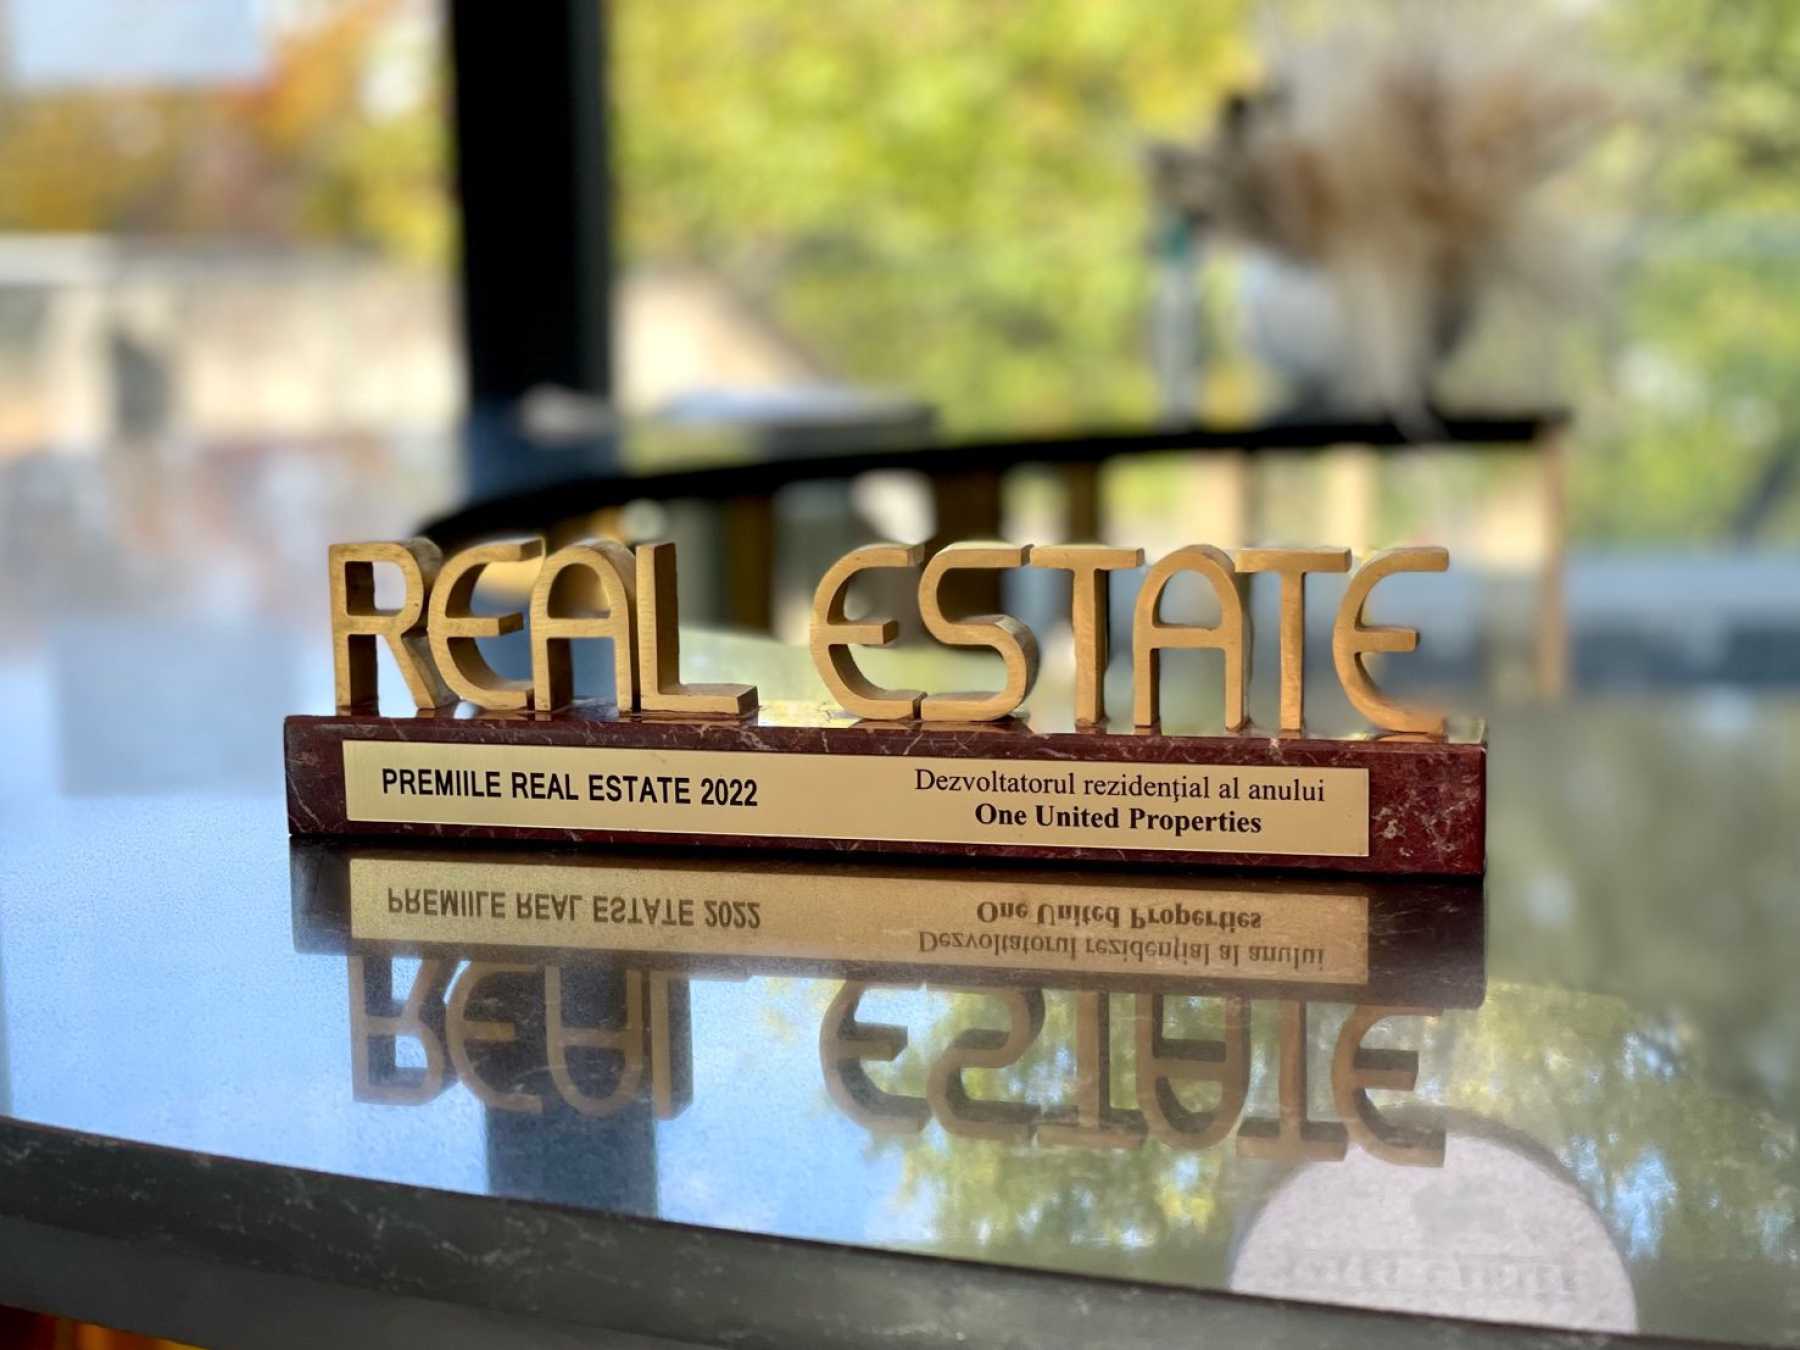 One United Properties, the residential developer of the year at the Real Estate Gala 2022